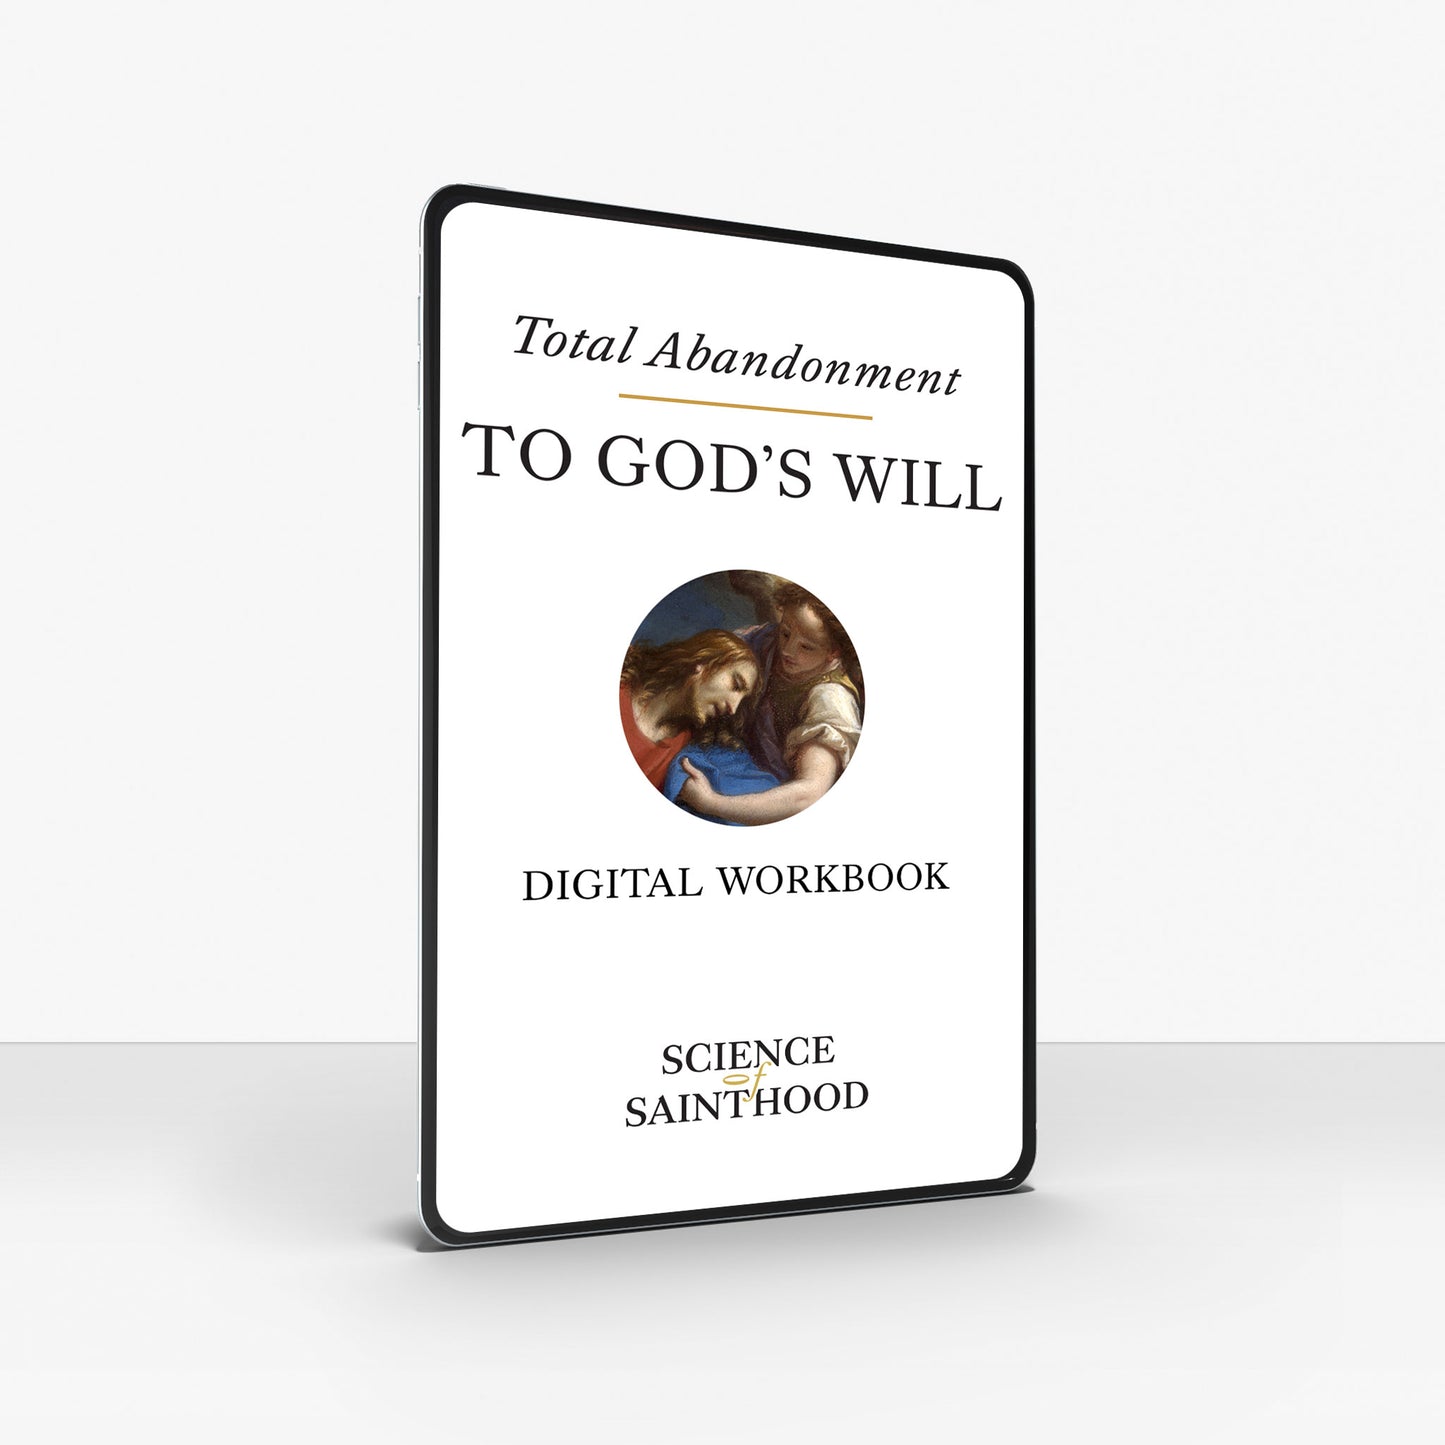 Interactive Digital Workbook - Total Abandonment to God's Will